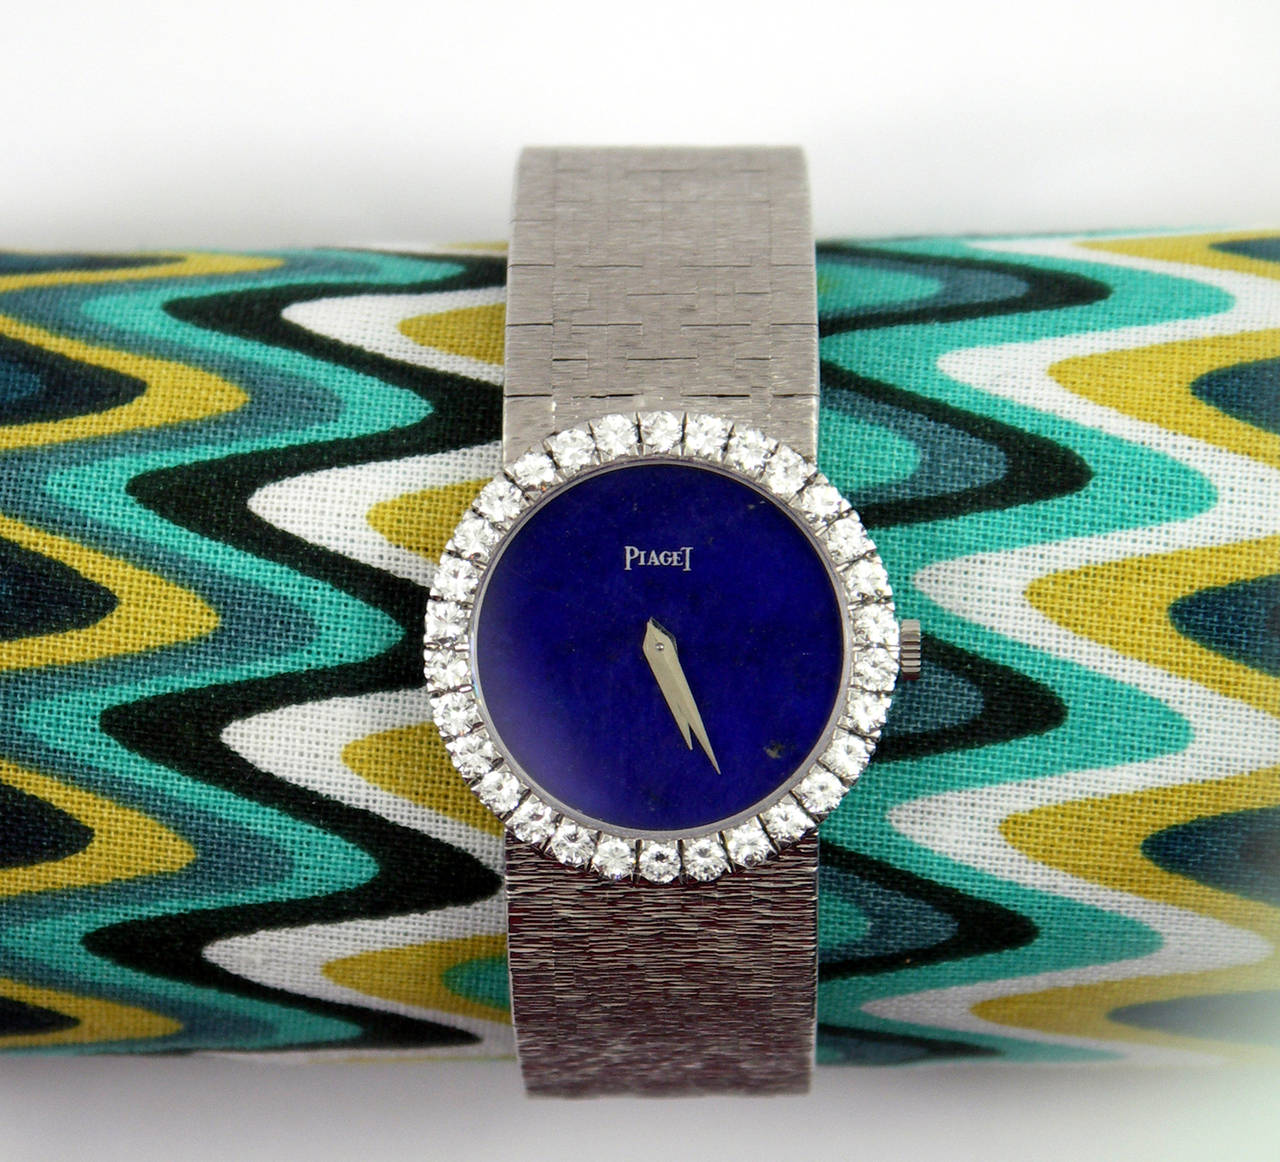 One lady's 18K white gold Piaget watch featuring a bezel measuring 25mm in diameter, and set with a total of approximately 1.66ct of round brilliant cut diamonds. The dial is a deep blue color Lapis Lazuli. The overall length is 6 1/2 inches.